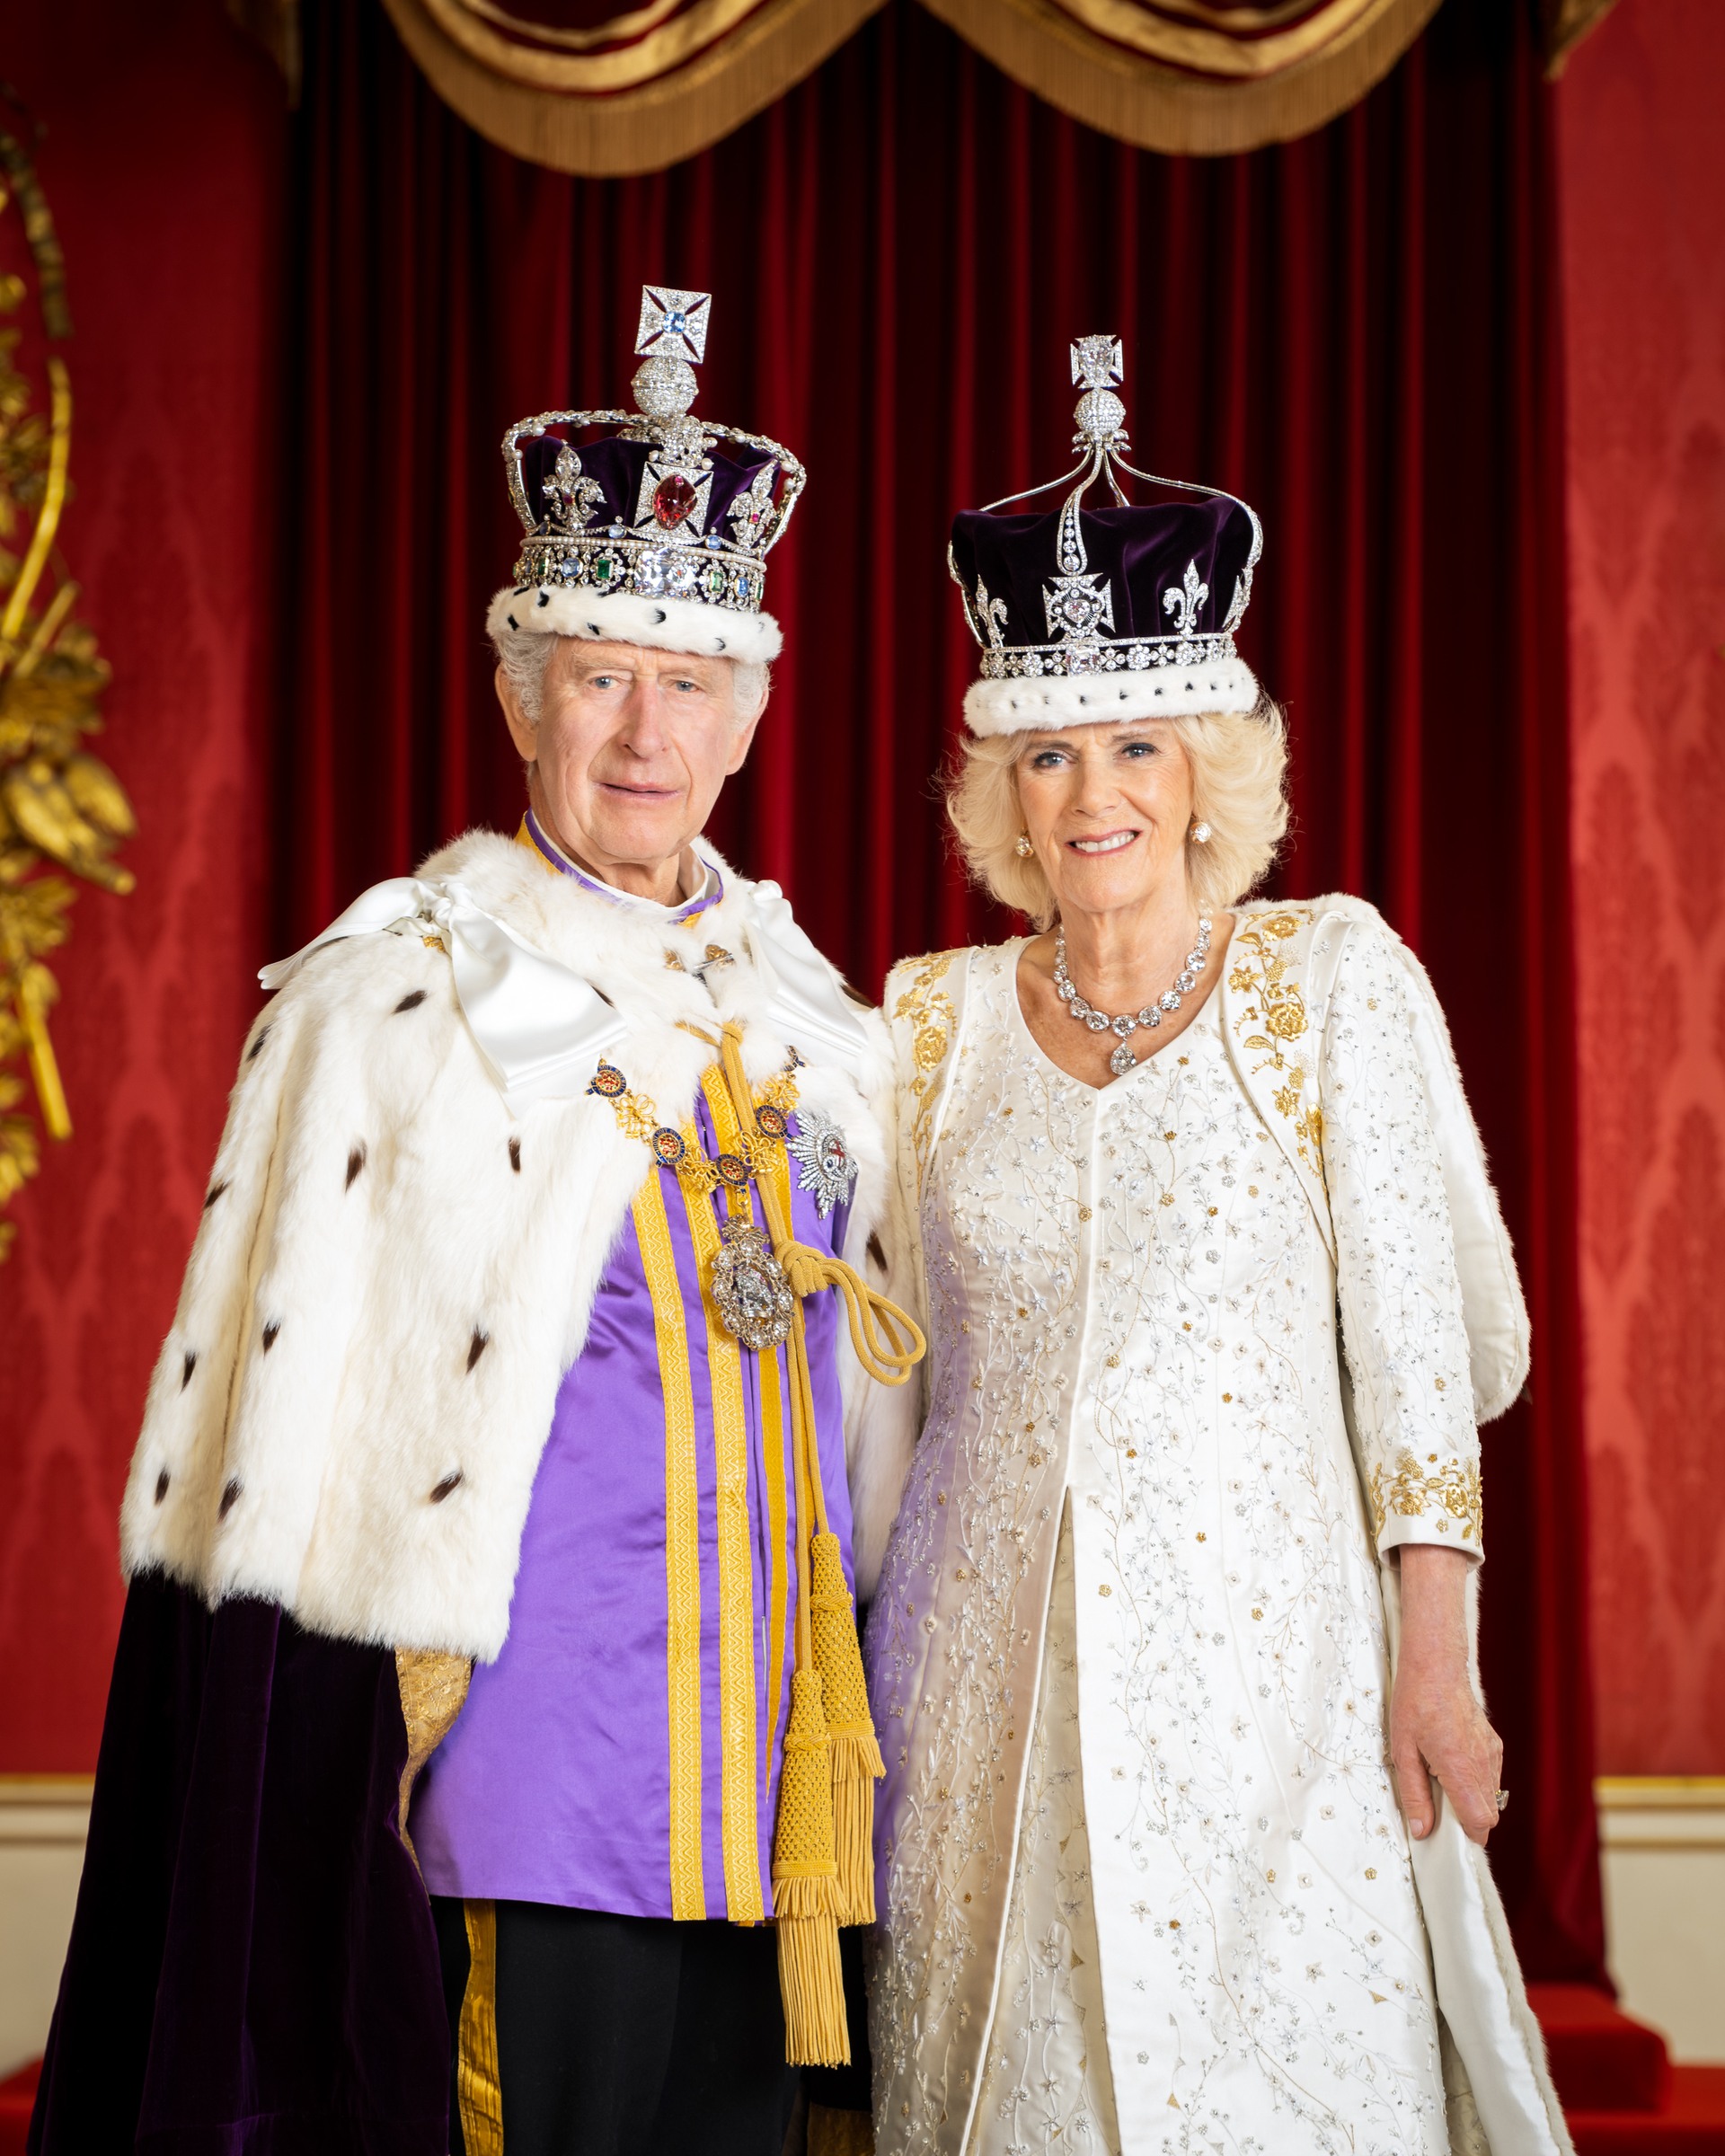 His Majesty King Charles and Her Majesty Queen Camilla are pictured in the Throne Room at Buckingham Palace. 